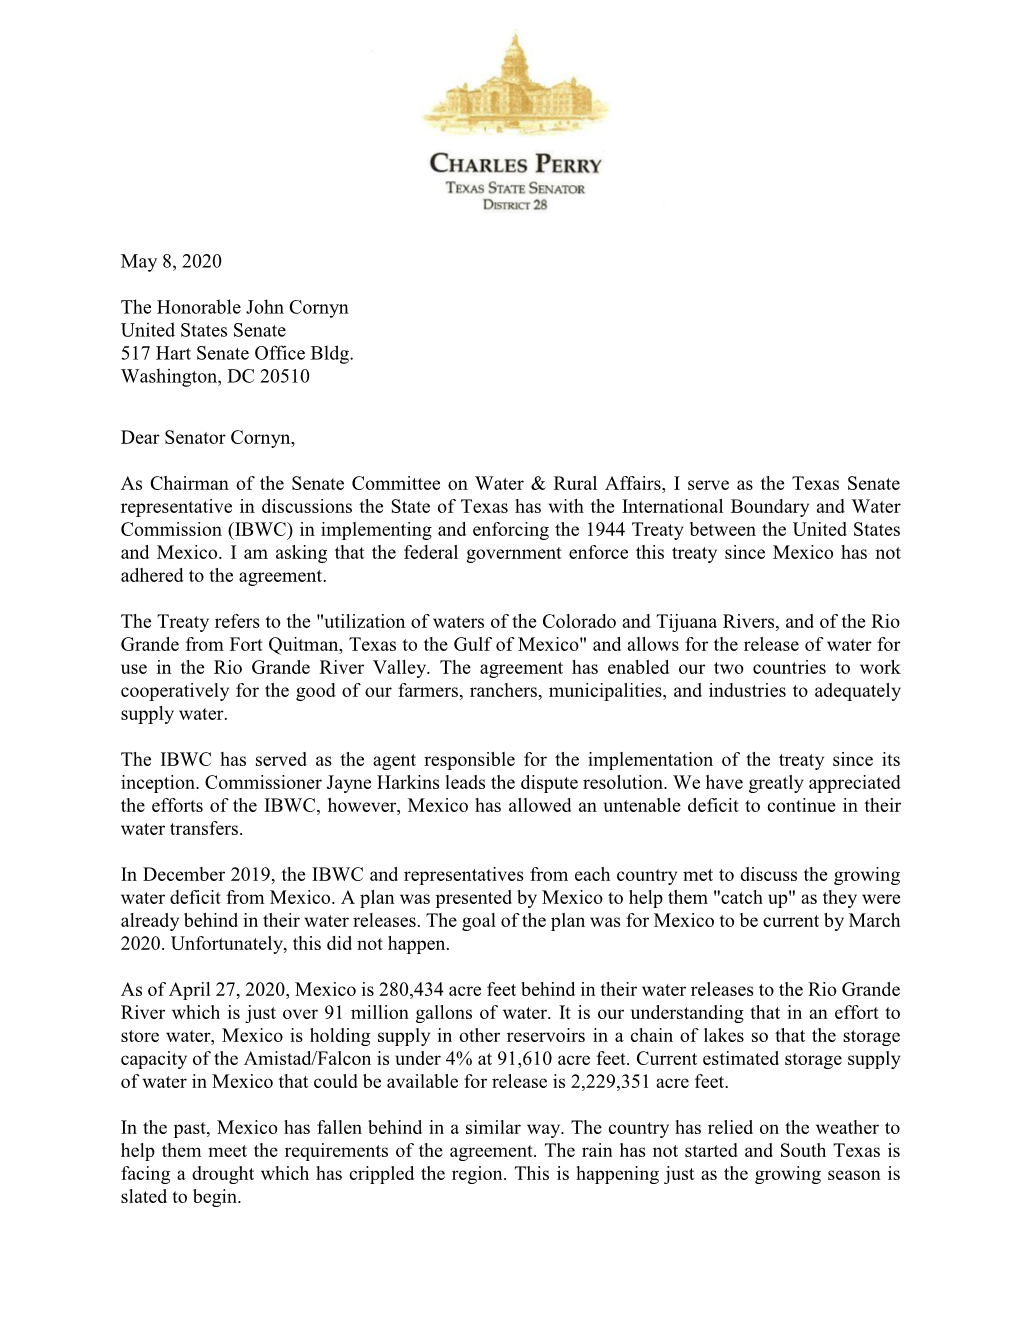 May 8, 2020 Letter from Texas Senator Perry to United States